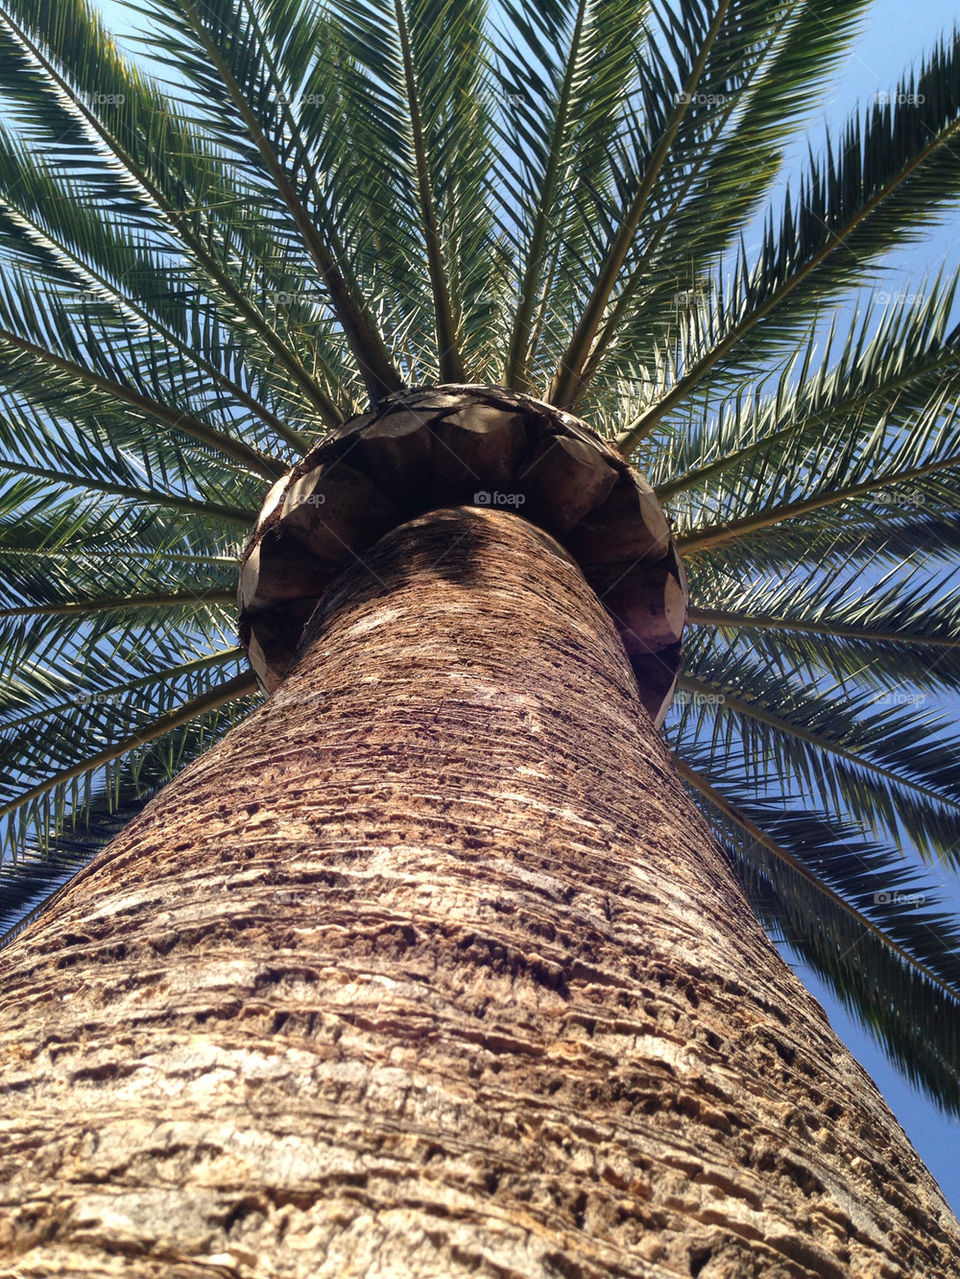 Every good vacation contains a certain amount of looking at palm